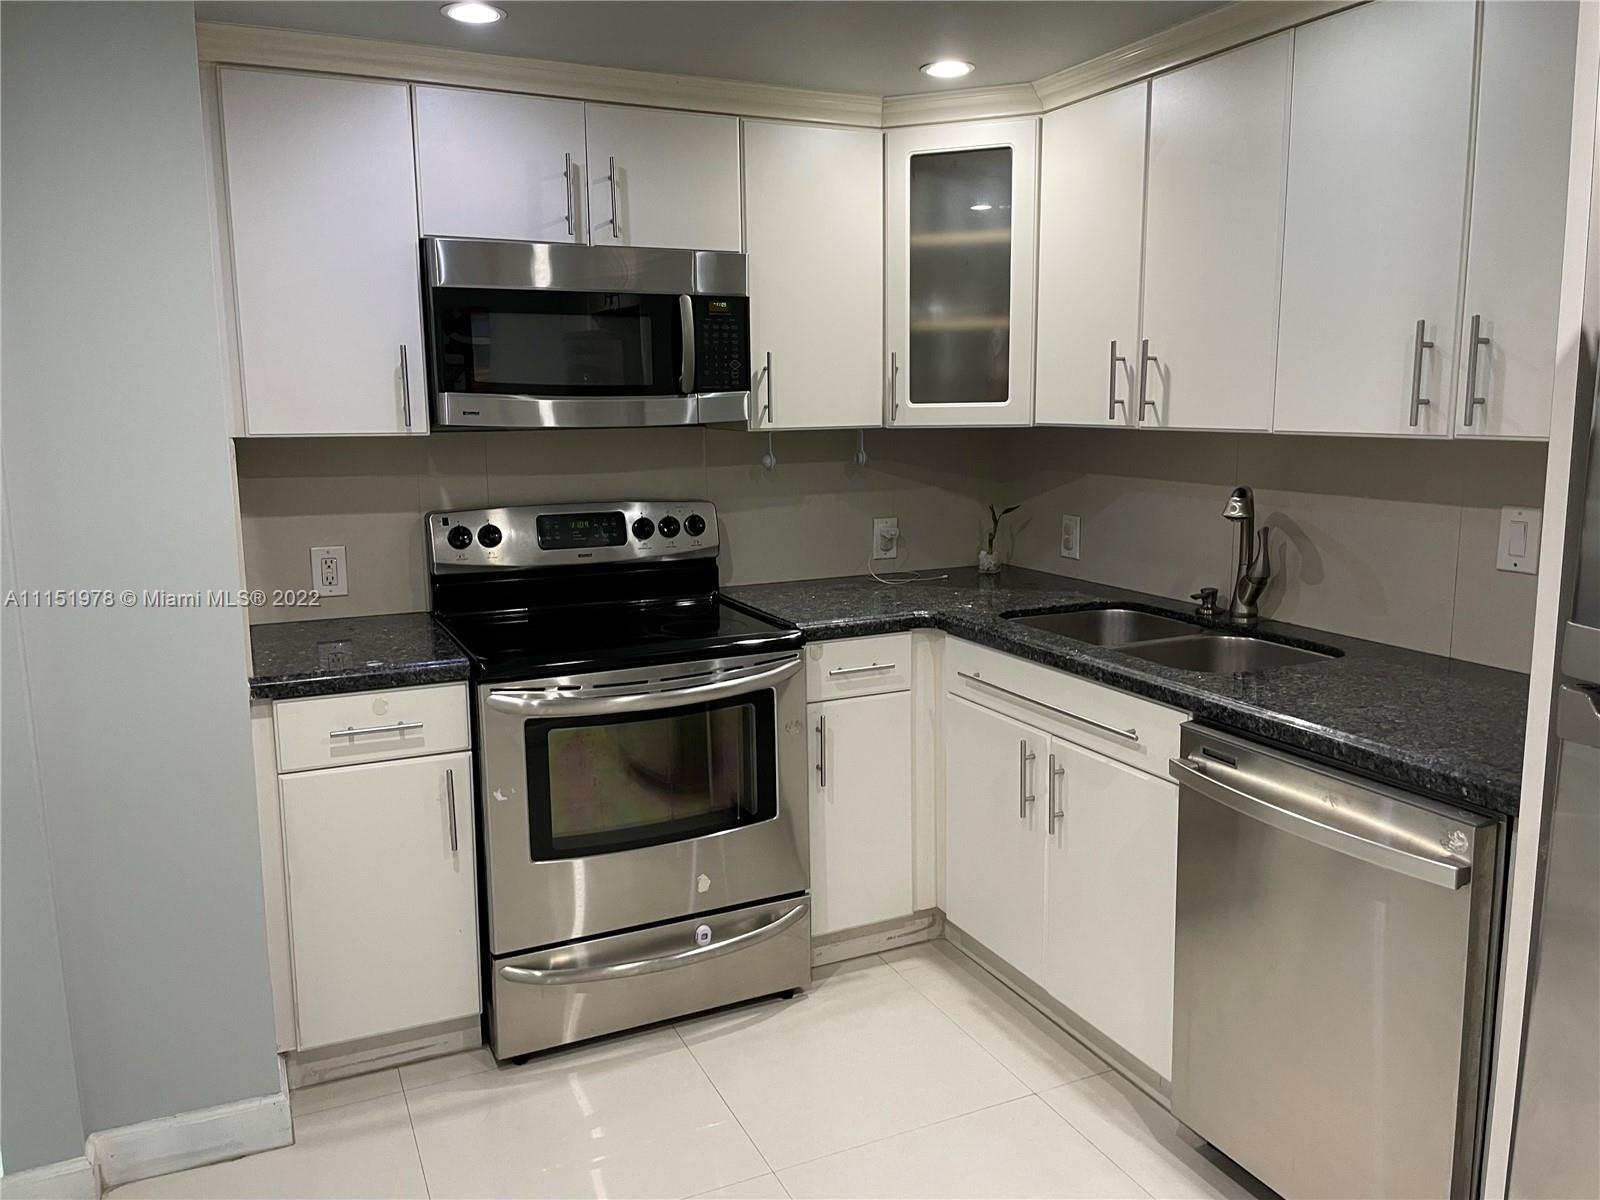 Completely remodeled dream unit located in beautiful Sunny Isles. AMAZING kitchen with s/s appliance